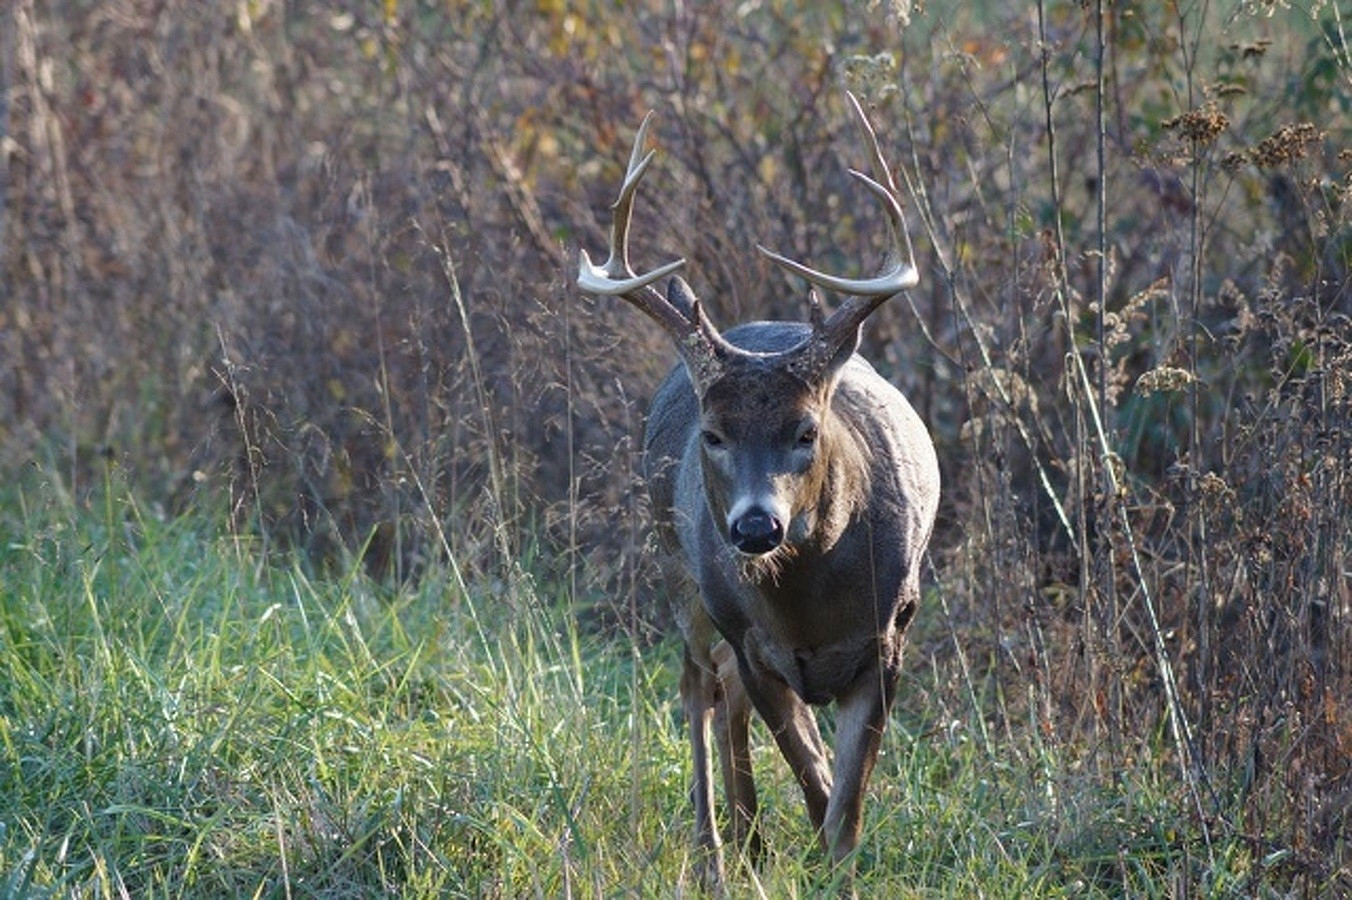 When Will The Whitetail Rut Start In Pennsylvania For 2021  Timing For Whitetail Deer Rut In Penna